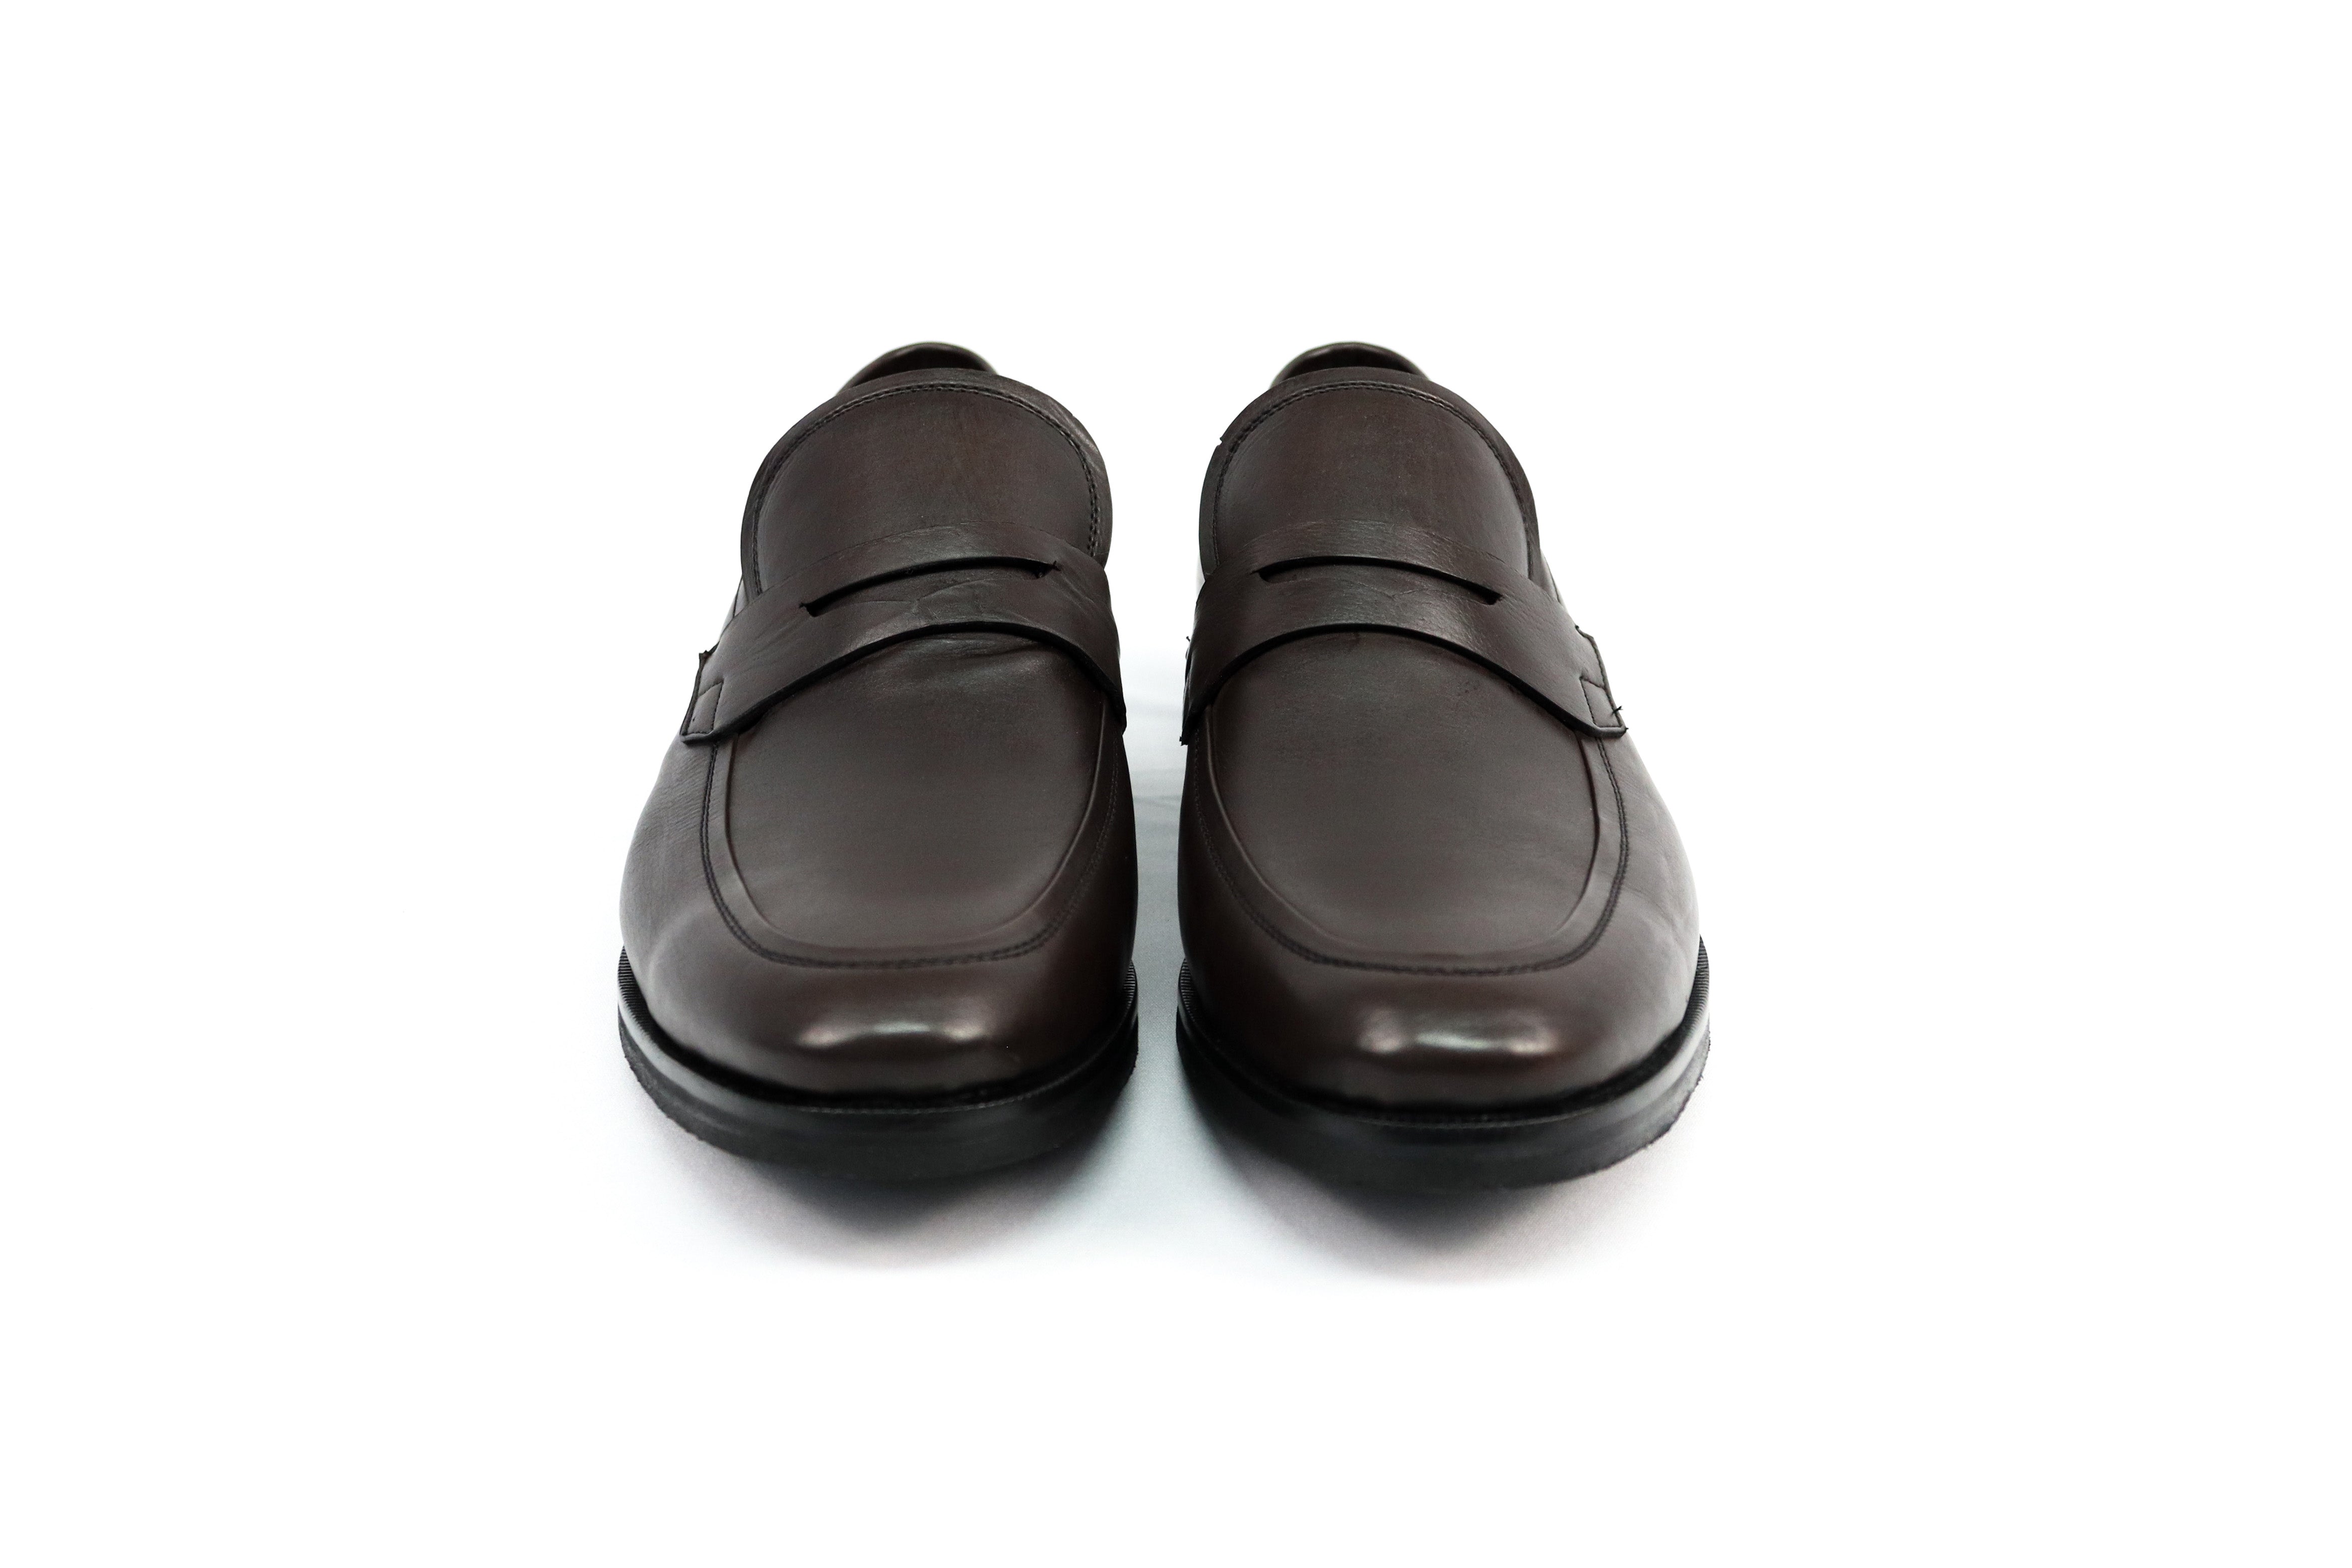 Loafer Basic - Madrid Coffee Brown color